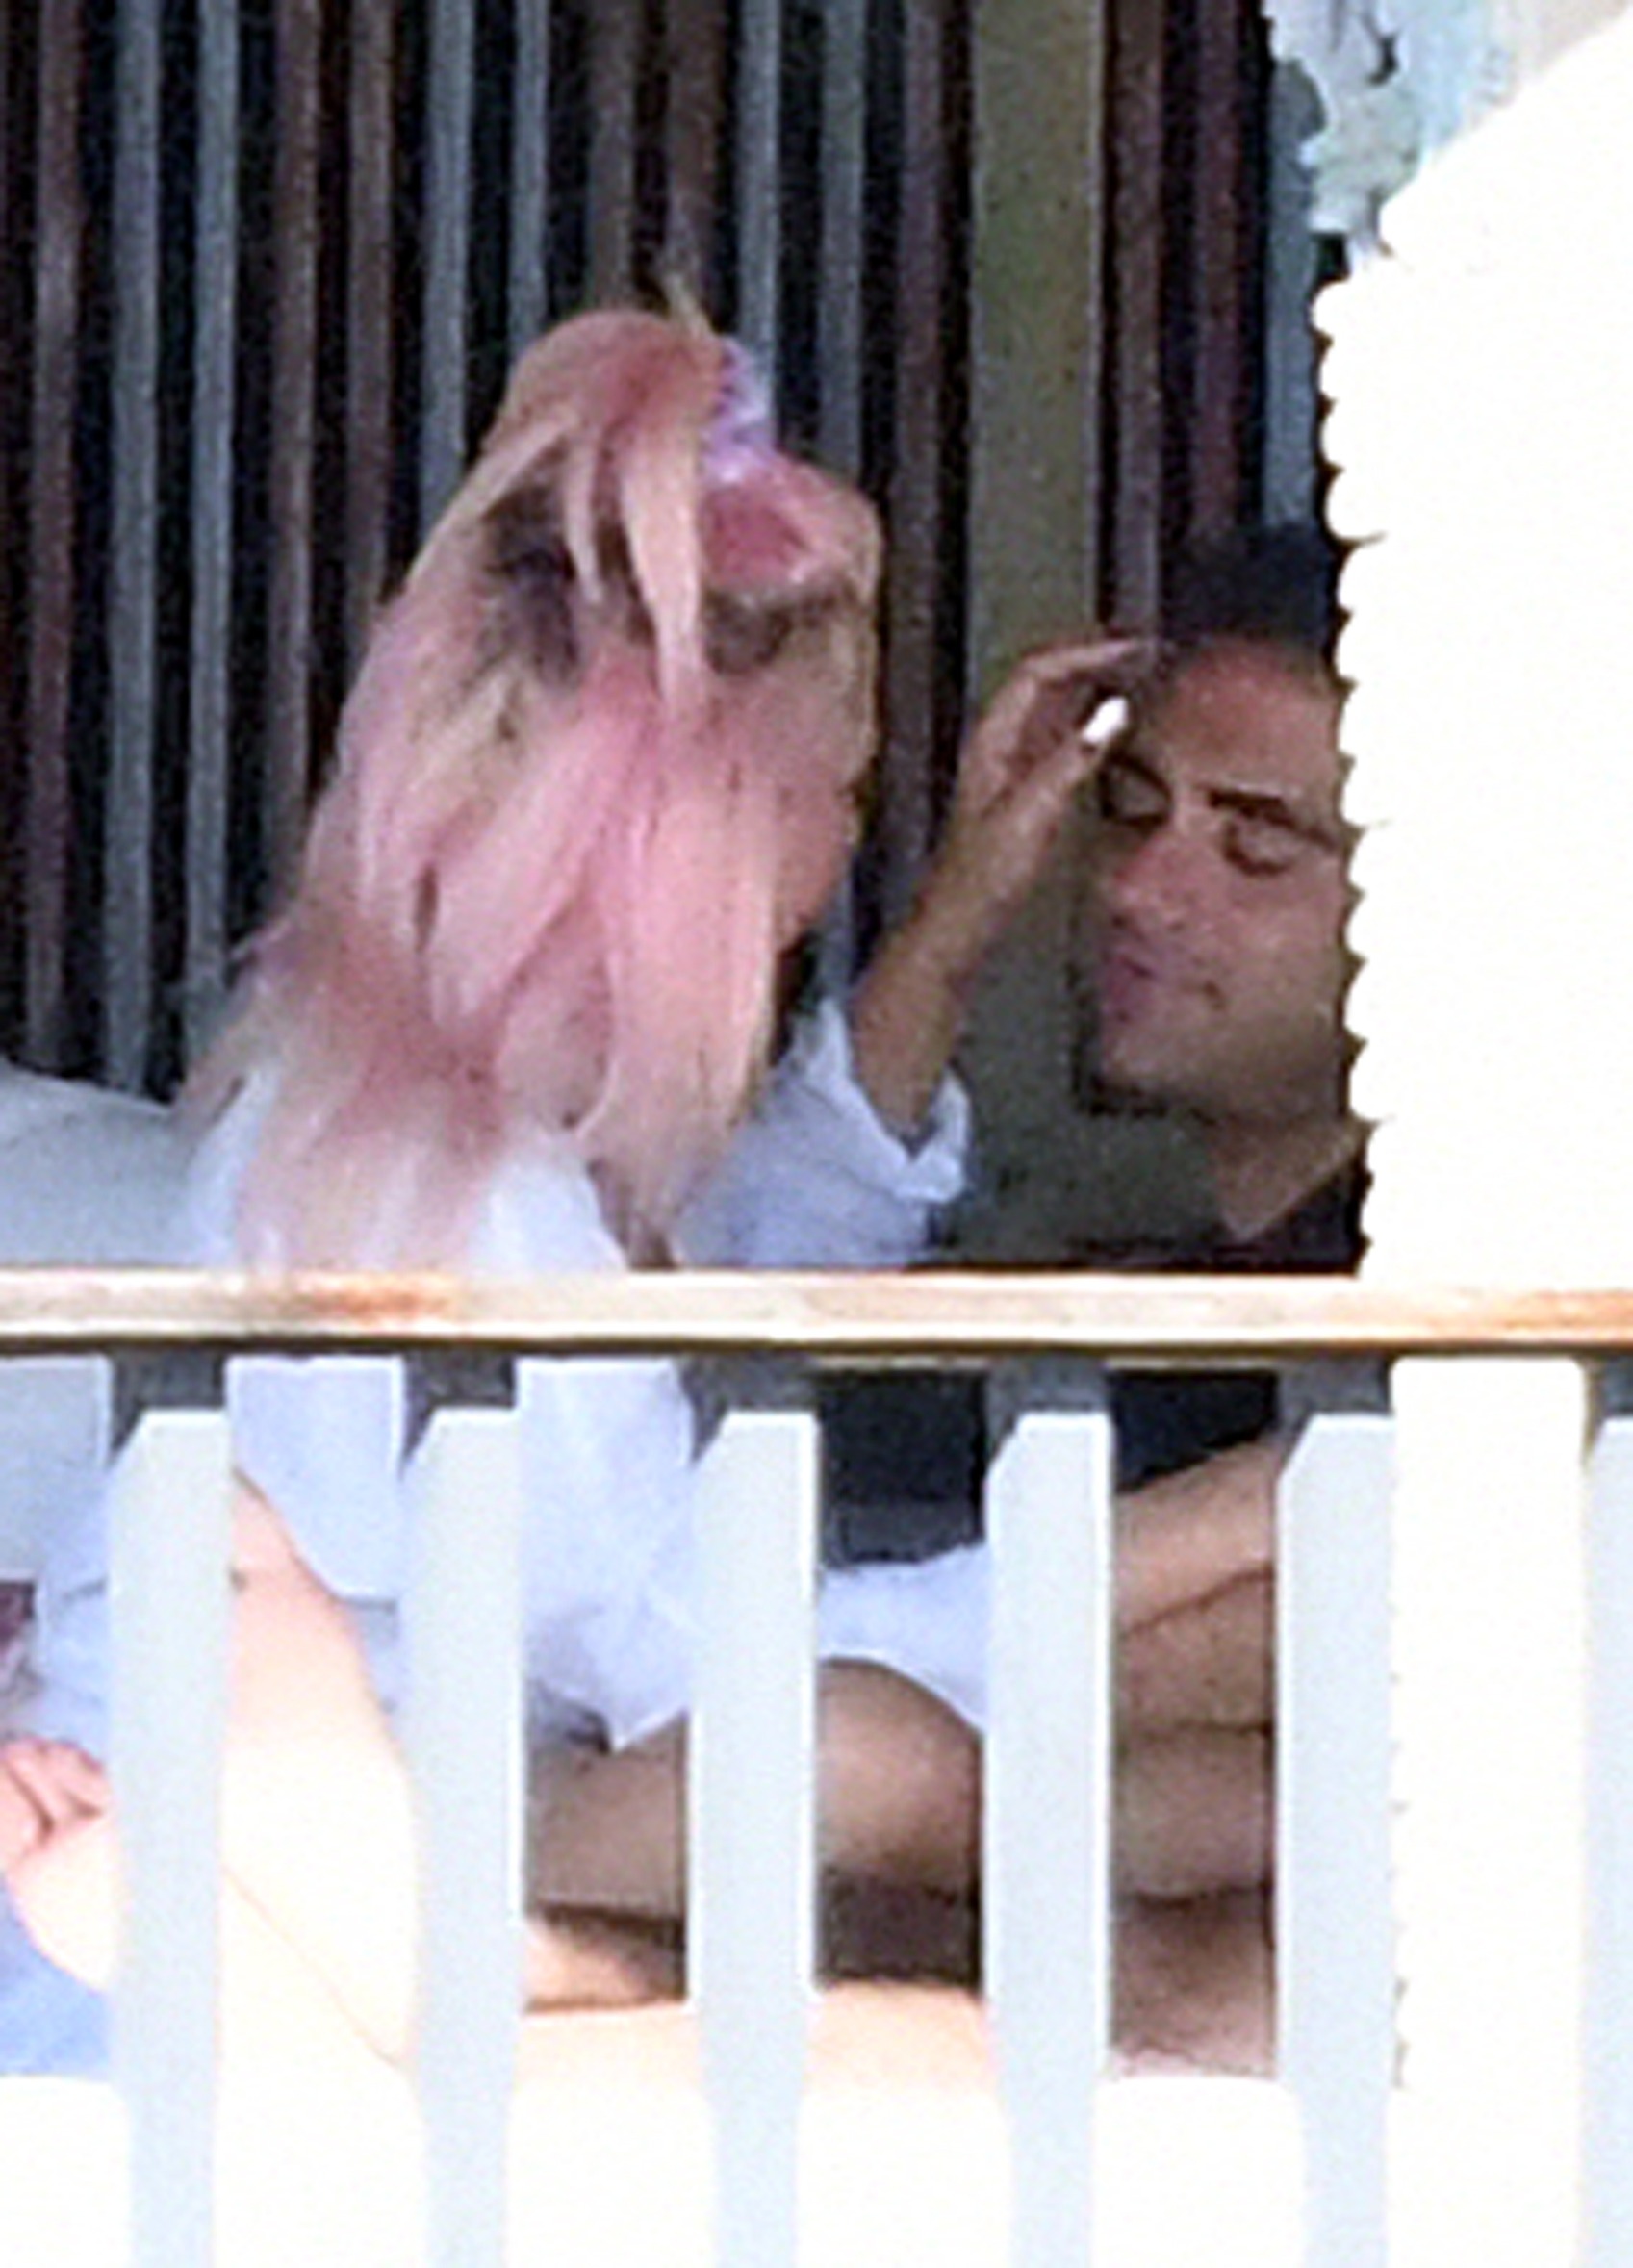 *PREMIUM EXCLUSIVE NO WEB UNTIL 2130 EST 2ND FEB* Lady Gaga seen kissing a mystery man as she relaxes in Miami ahead of her pre Super Bowl concert on Saturday. Gaga looked sensational as she chilled out wearing a black thong bikini whilst cuddling up to her new man. It is not known if her hunky companion is the same man the 33-year-old beauty was spotted sharing a midnight kiss with in Las Vegas over the New Year holiday. Gaga ended her engagement from talent agent, Christian Carino, 51, in February 2019. The pair began dating in 2017 and got engaged in October 2018.
30 Jan 2020, Image: 496030347, License: Rights-managed, Restrictions: World Rights, Model Release: no, Credit line: MEGA / The Mega Agency / Profimedia